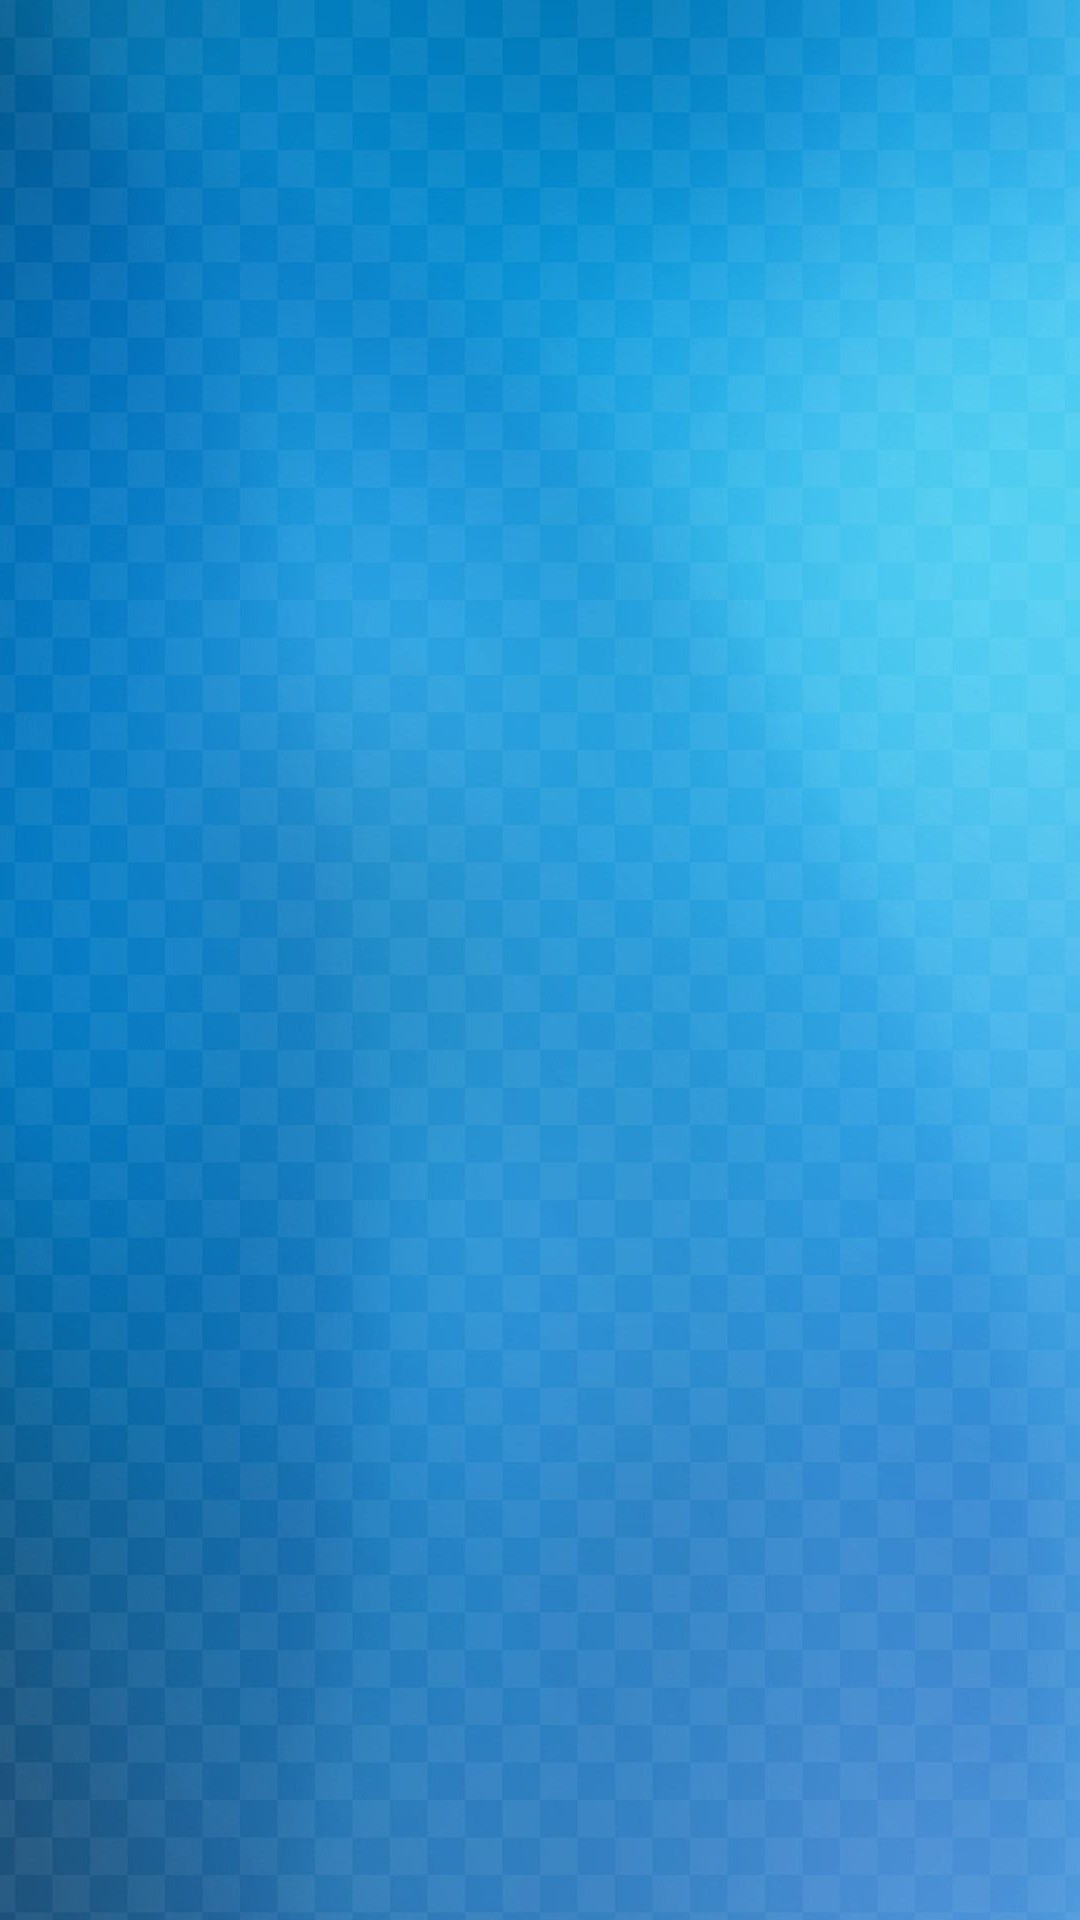 Blue Wallpaper Hd For iPhone 6 resolution 1080x1920